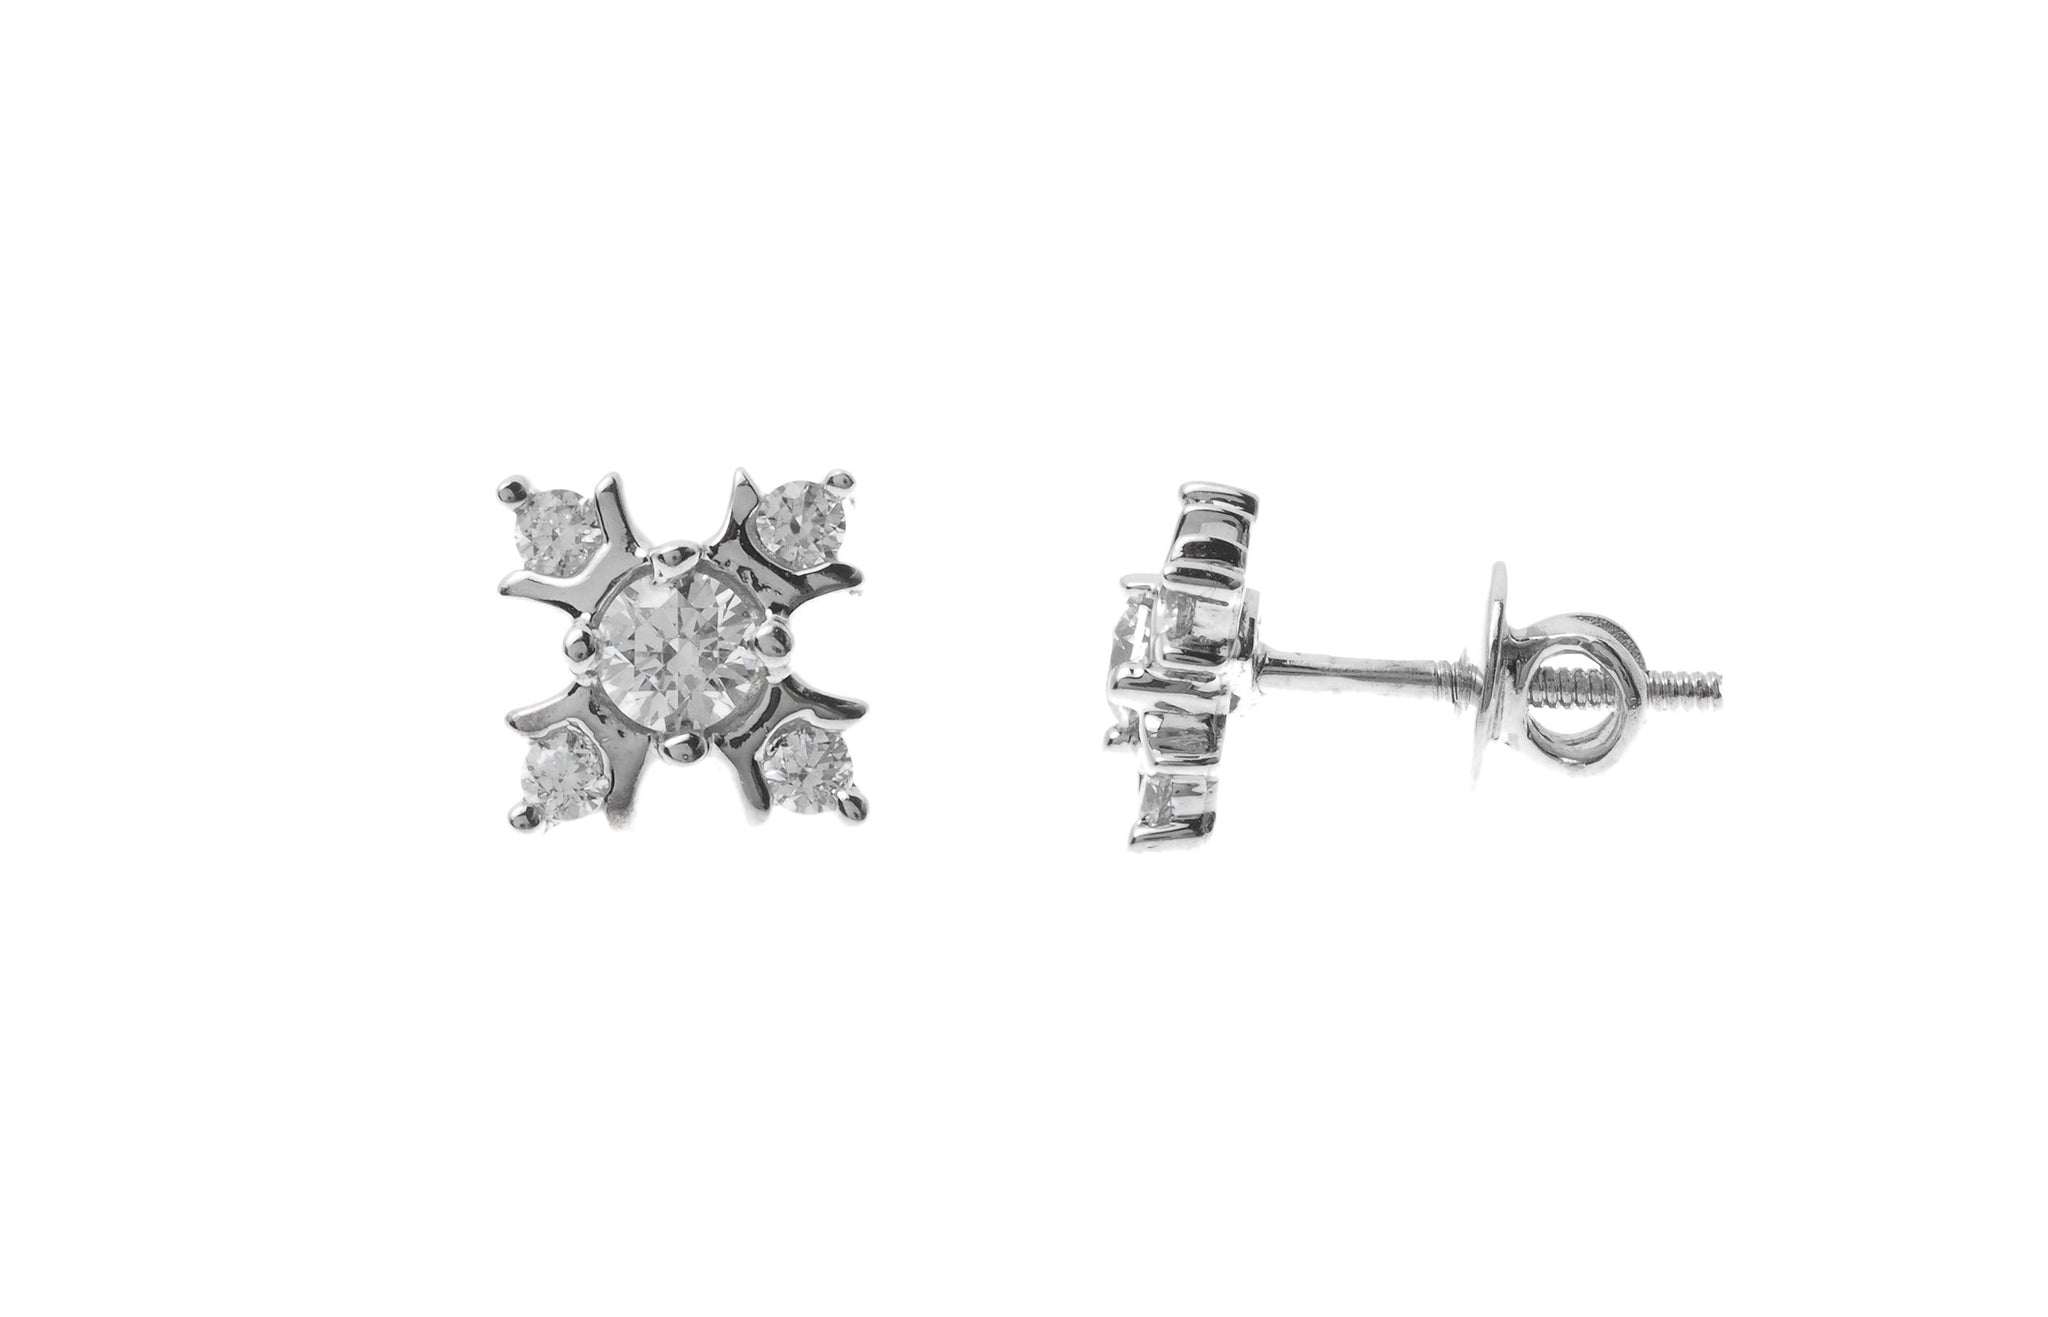 18ct White Gold Earrings set with Cubic Zirconia stones (2.99g) (ET7064)